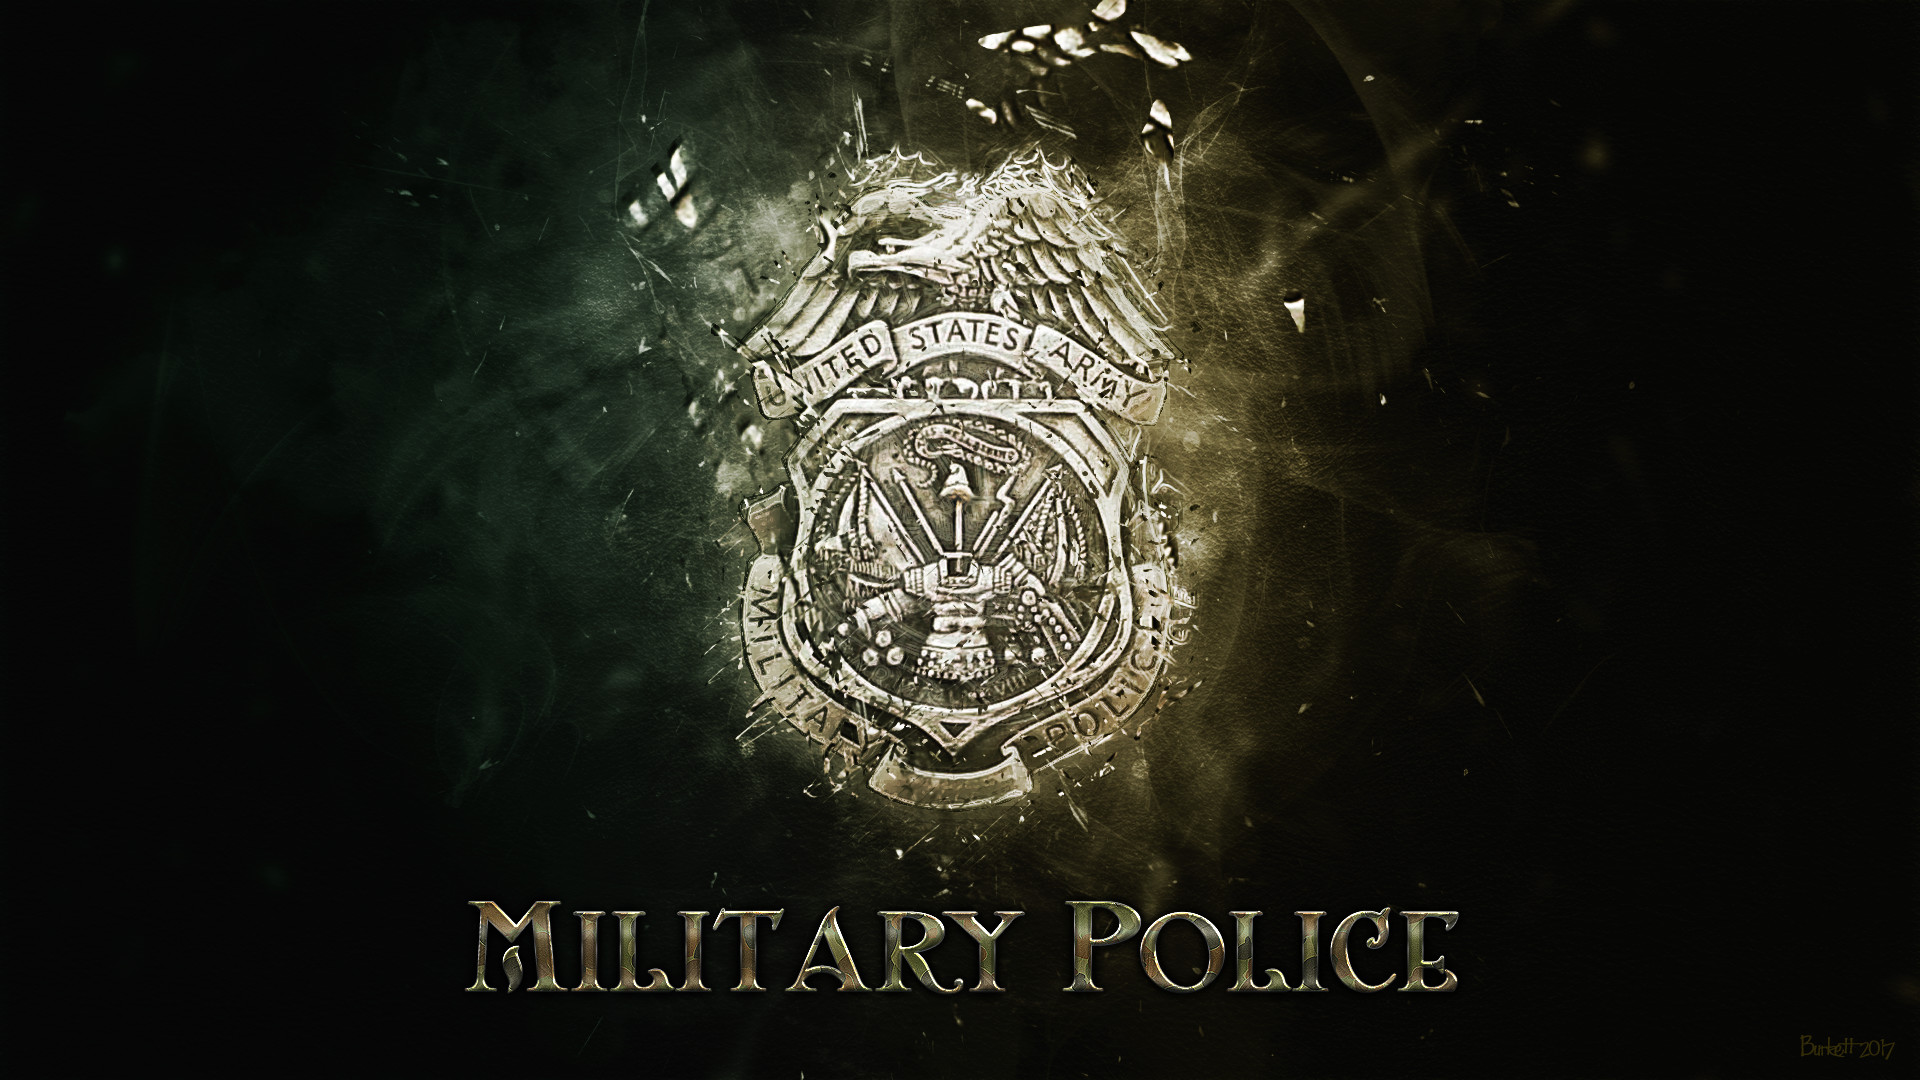 1920x1080 ... Police Wallpaper Images of U S Army Mp Wallpaper - #SC ...